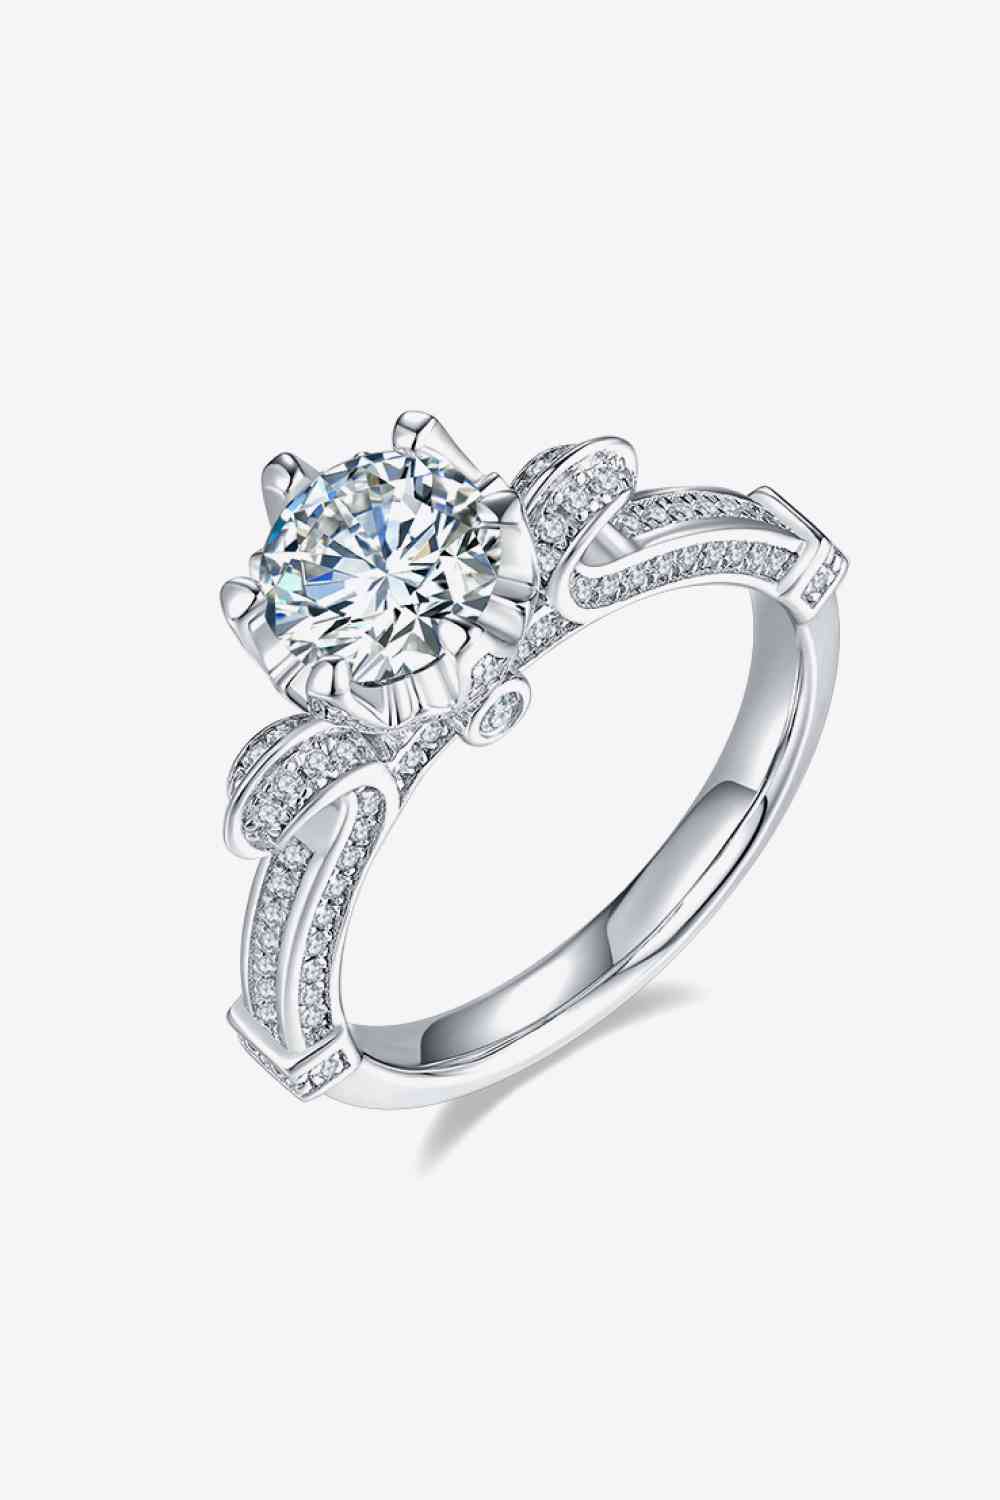 Adored 1 Carat Moissanite 925 Sterling Silver Ring Silver